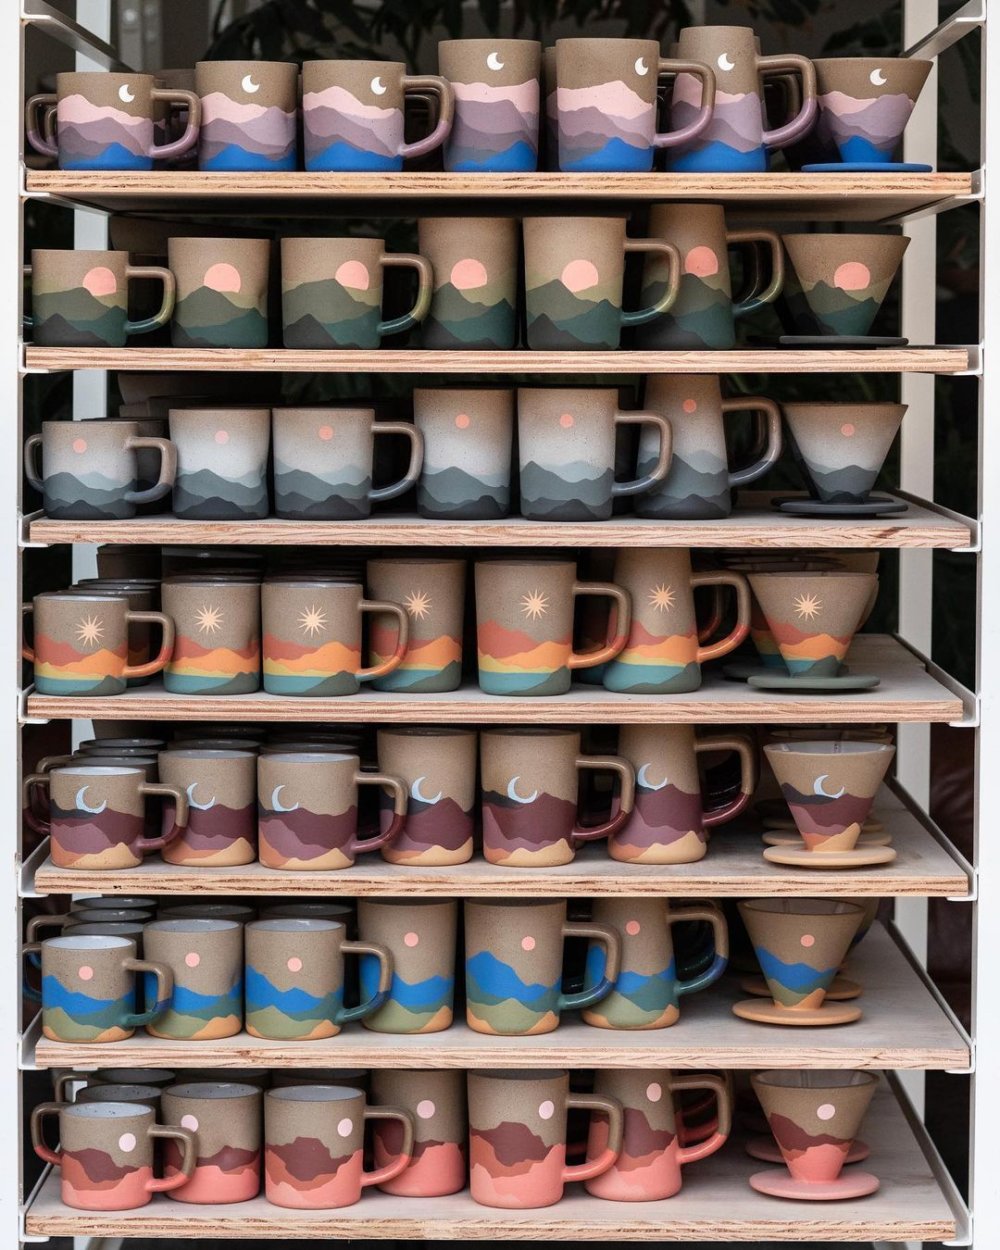 Gorgeous Handmade Ceramic Mugs Kettle And Bowls That Illustrate Magical Landscapes By Callahan Ceramics 11